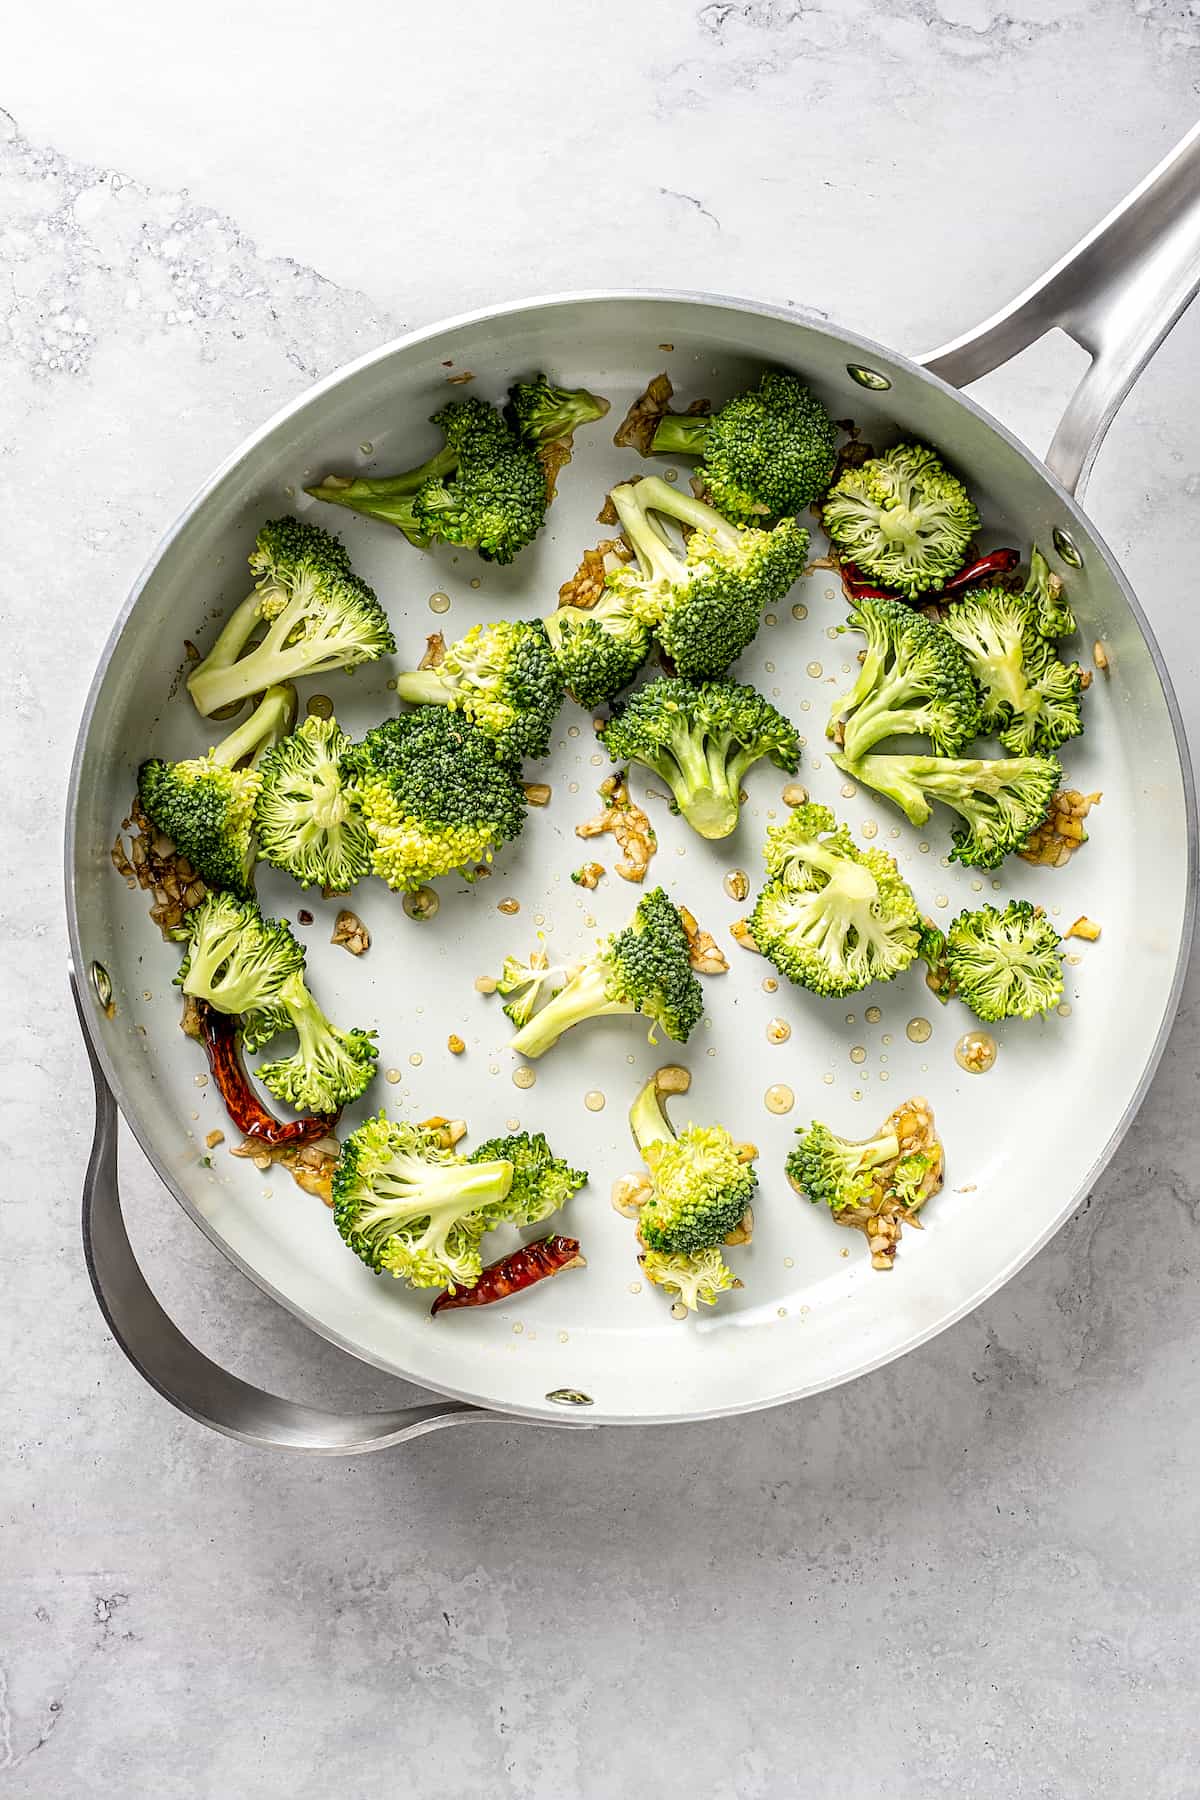 Overhead view of broccoli and garlic in skillet